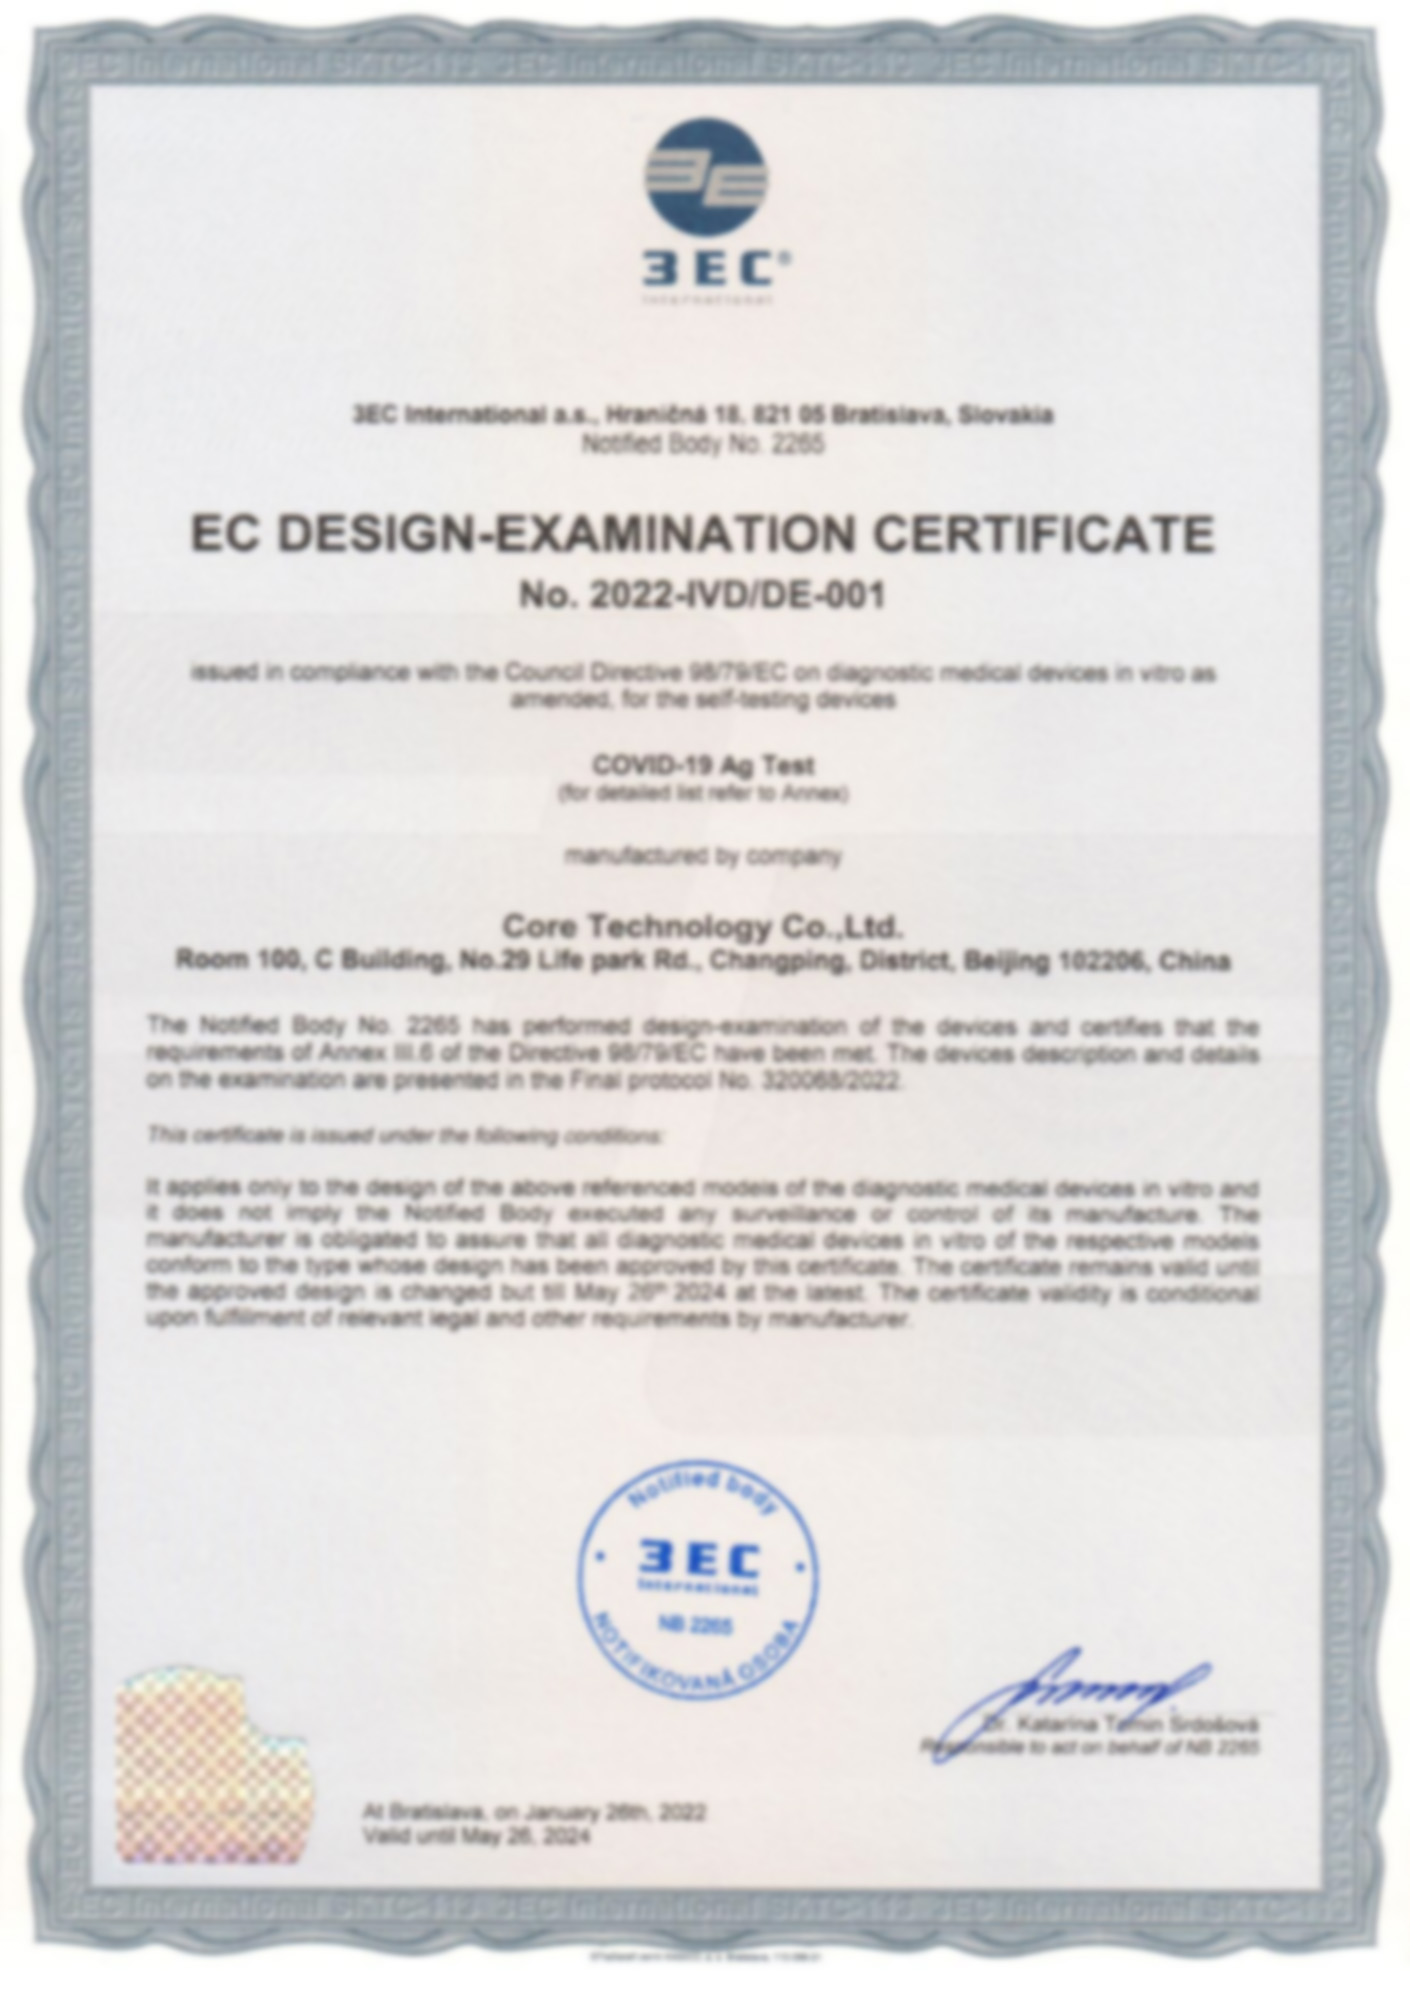 CE Certificate of COVID-19 Ag Test